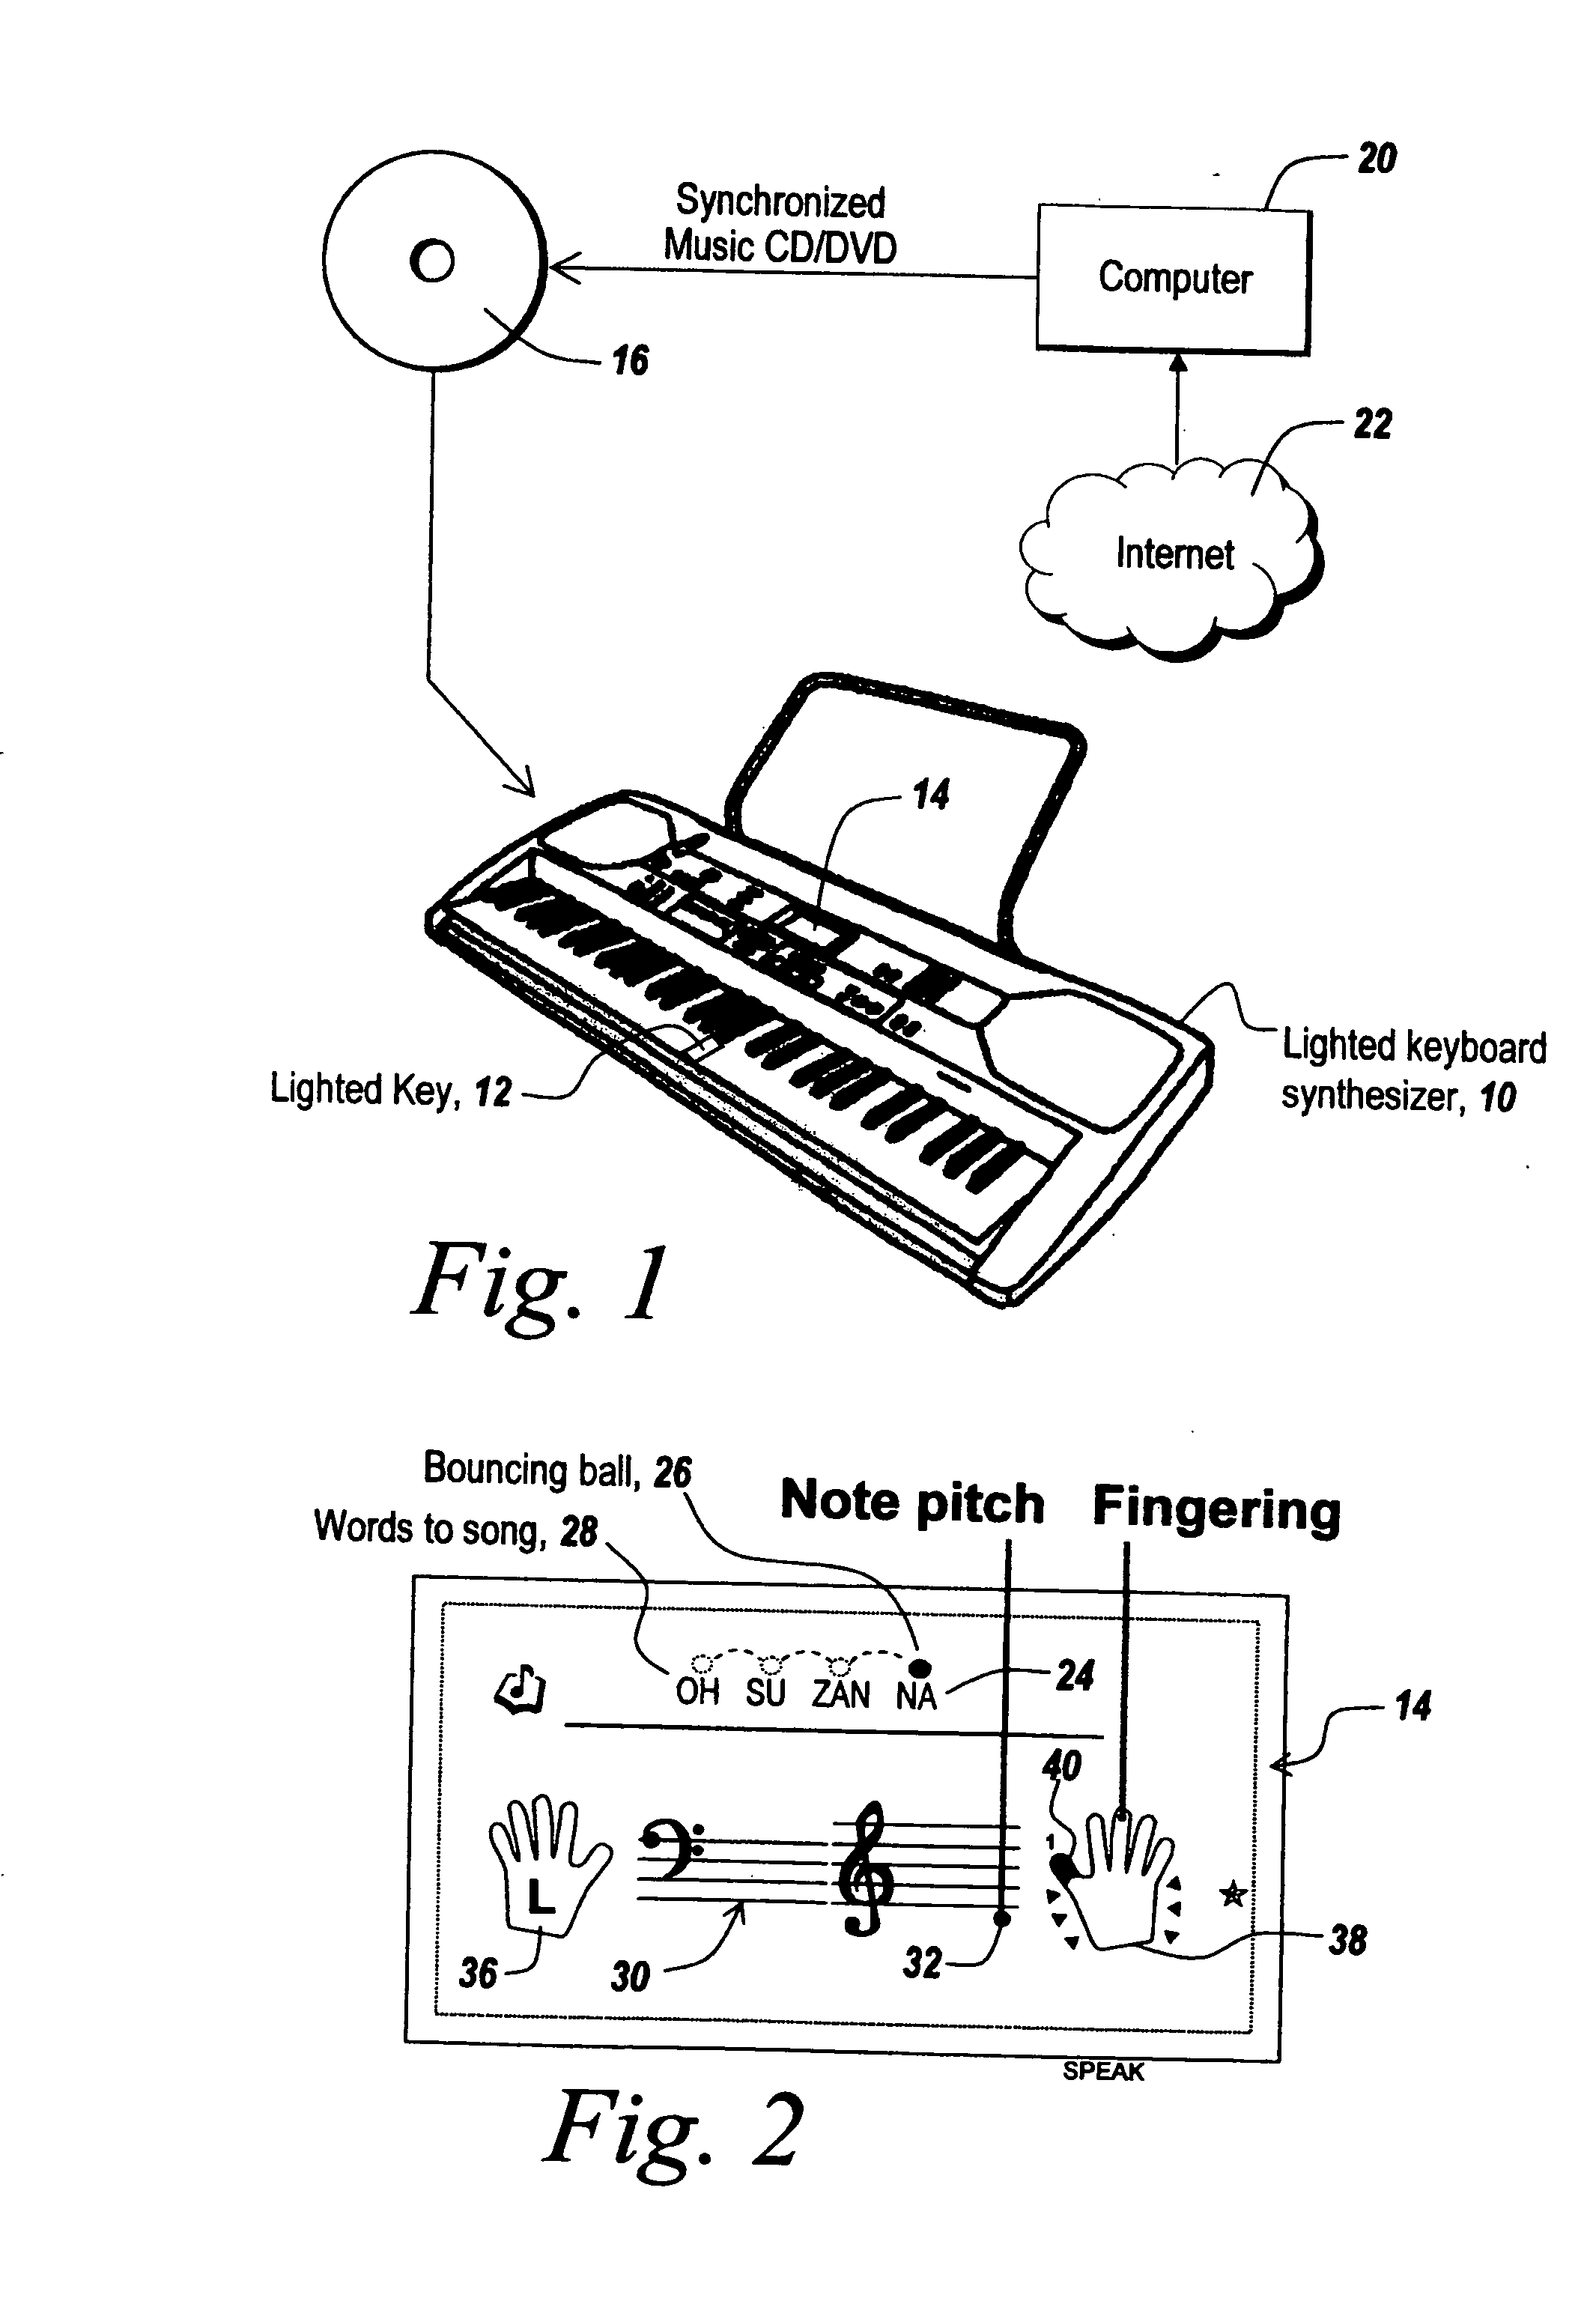 Synthesized music delivery system